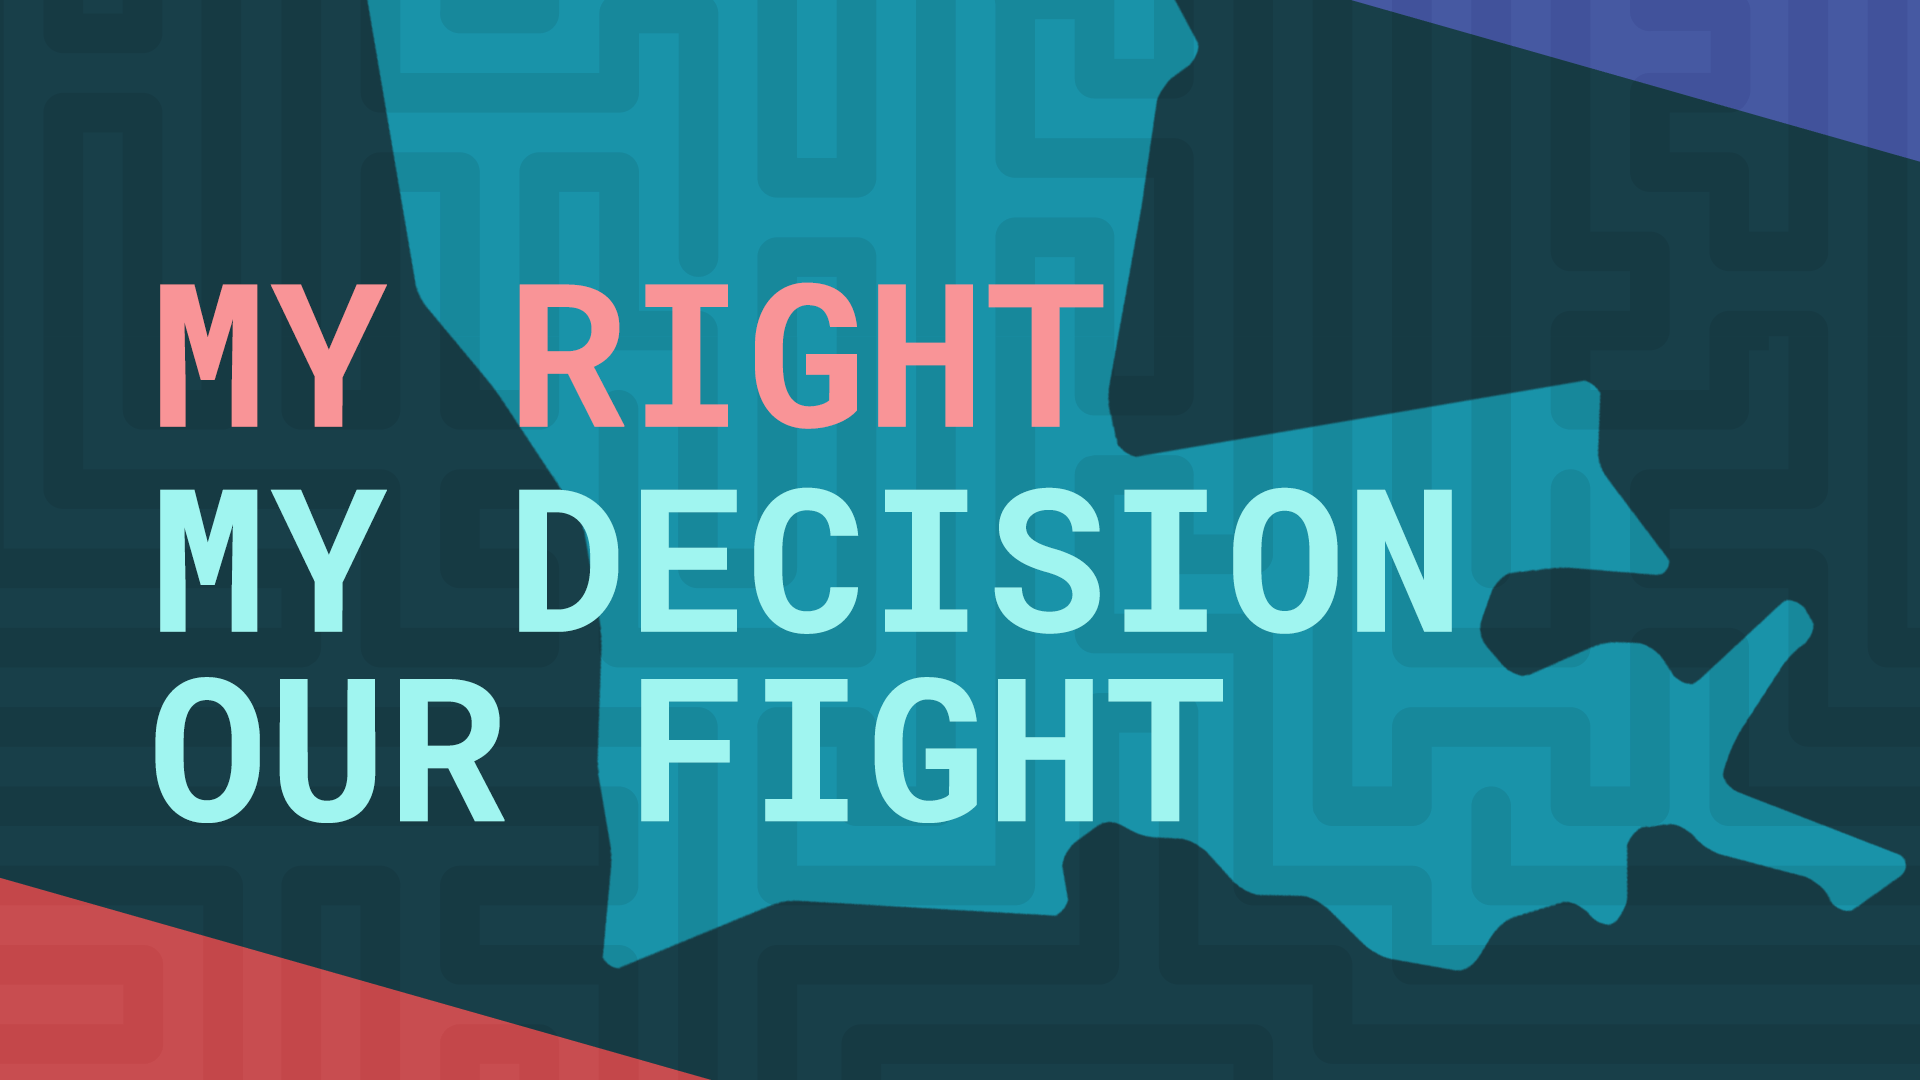 My Right. My Decision. Our Fight.